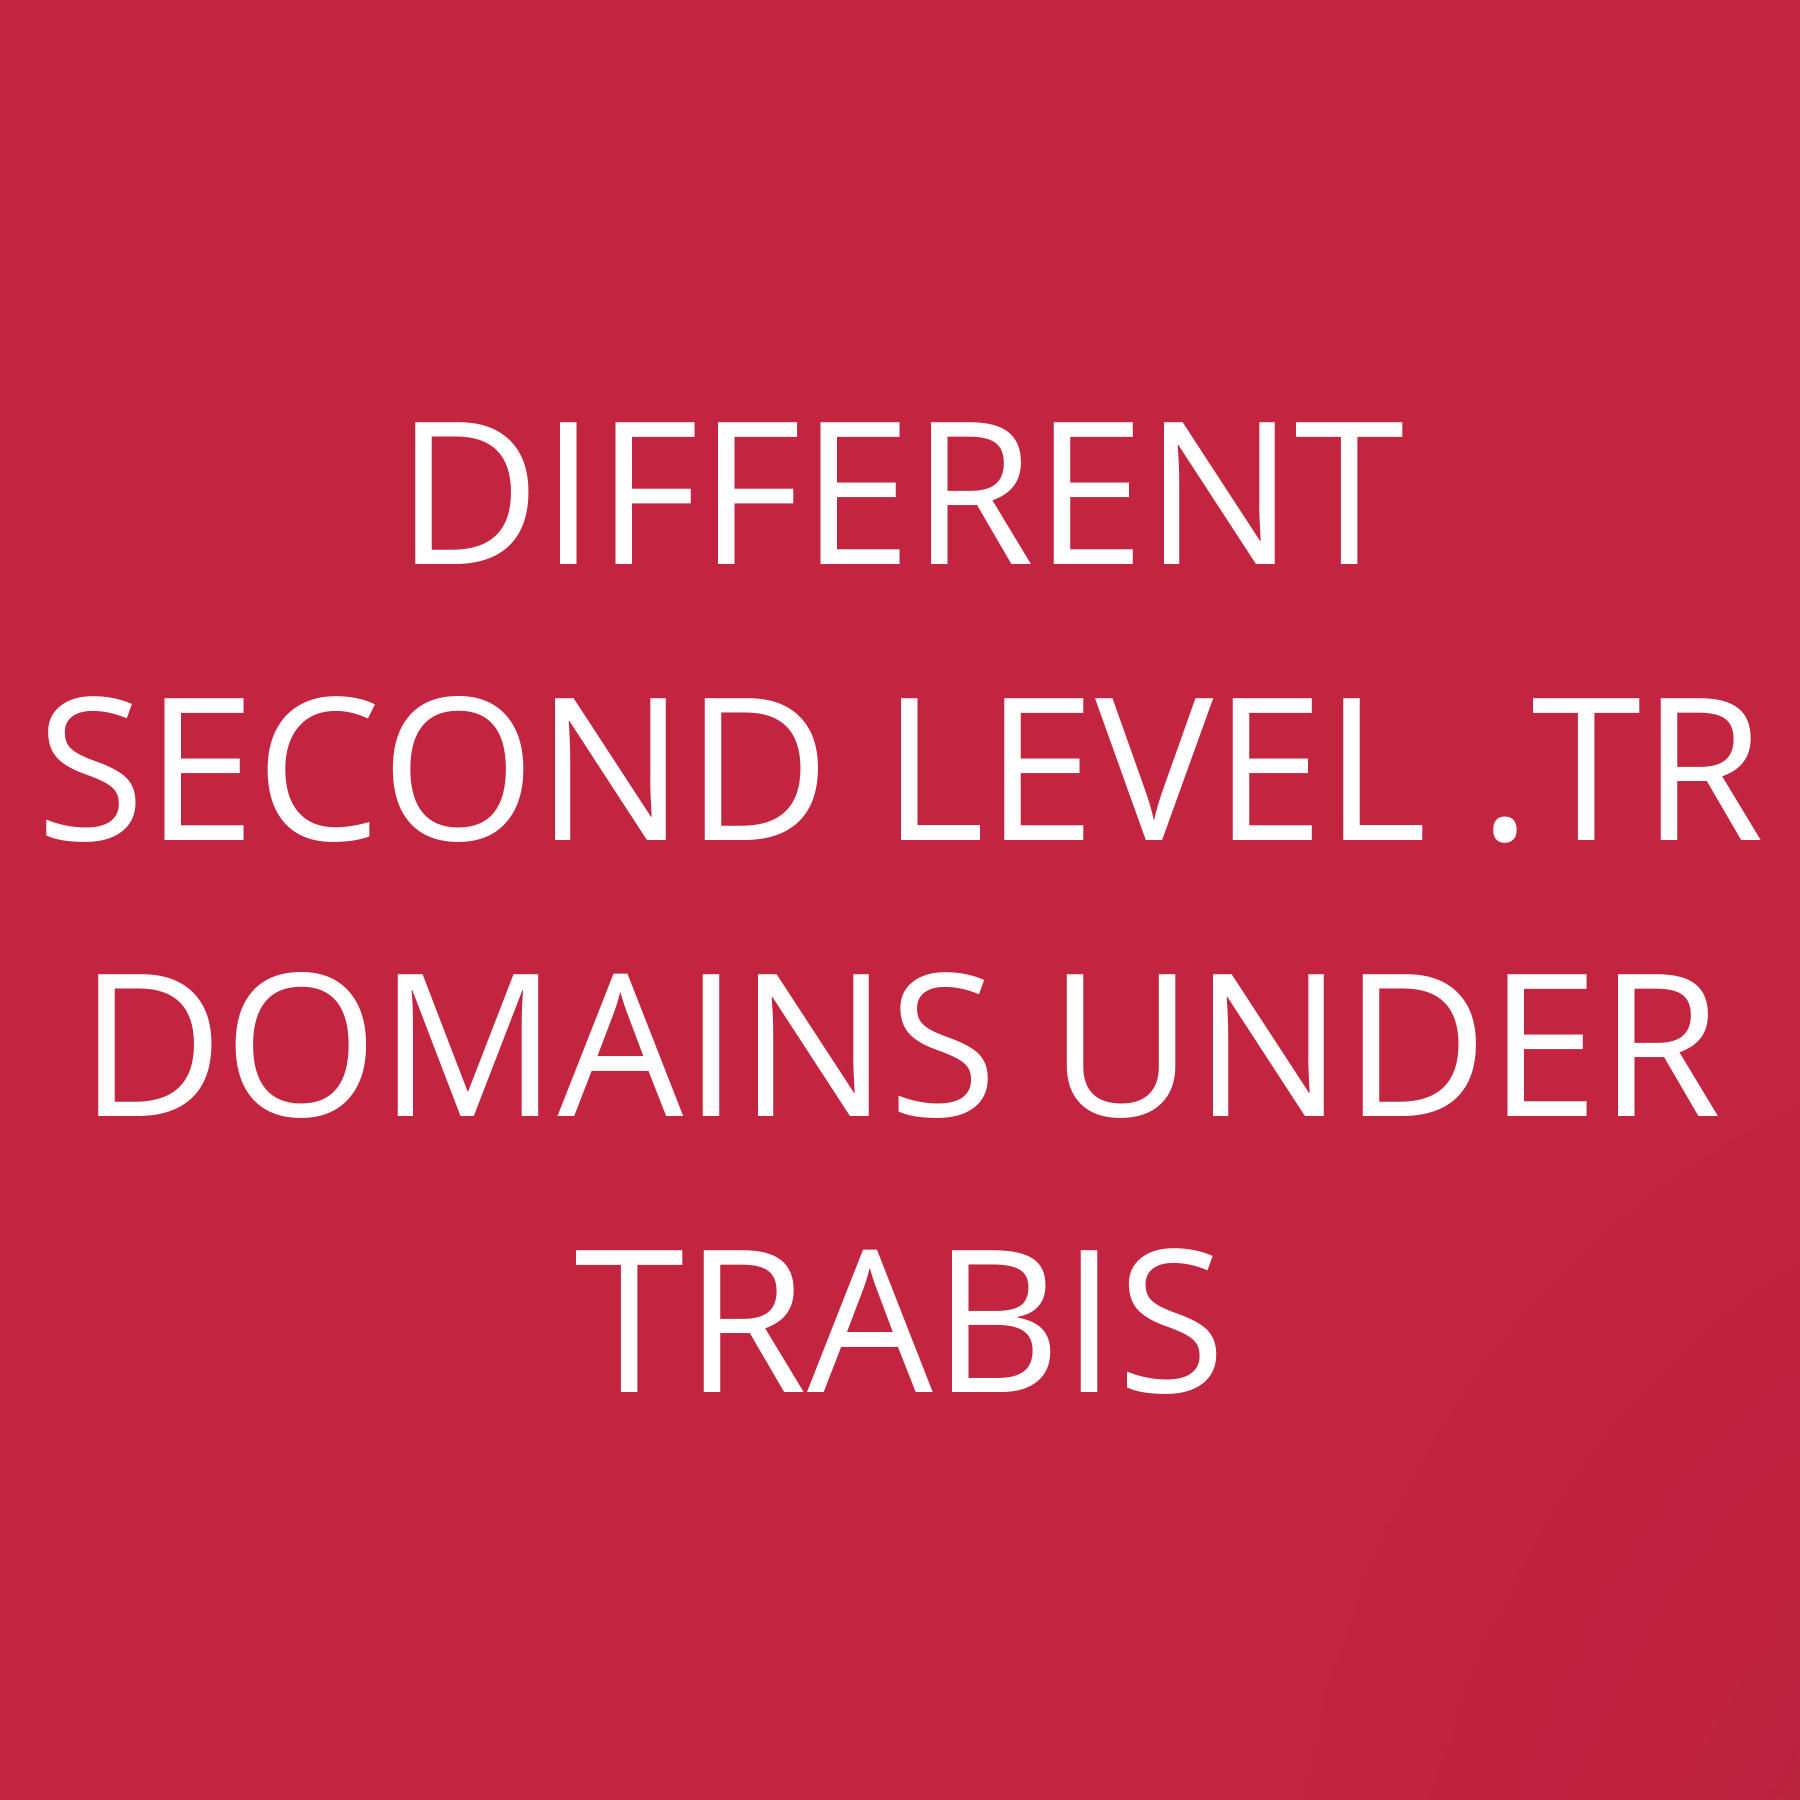 Different Second level .tr domains under TRABIS